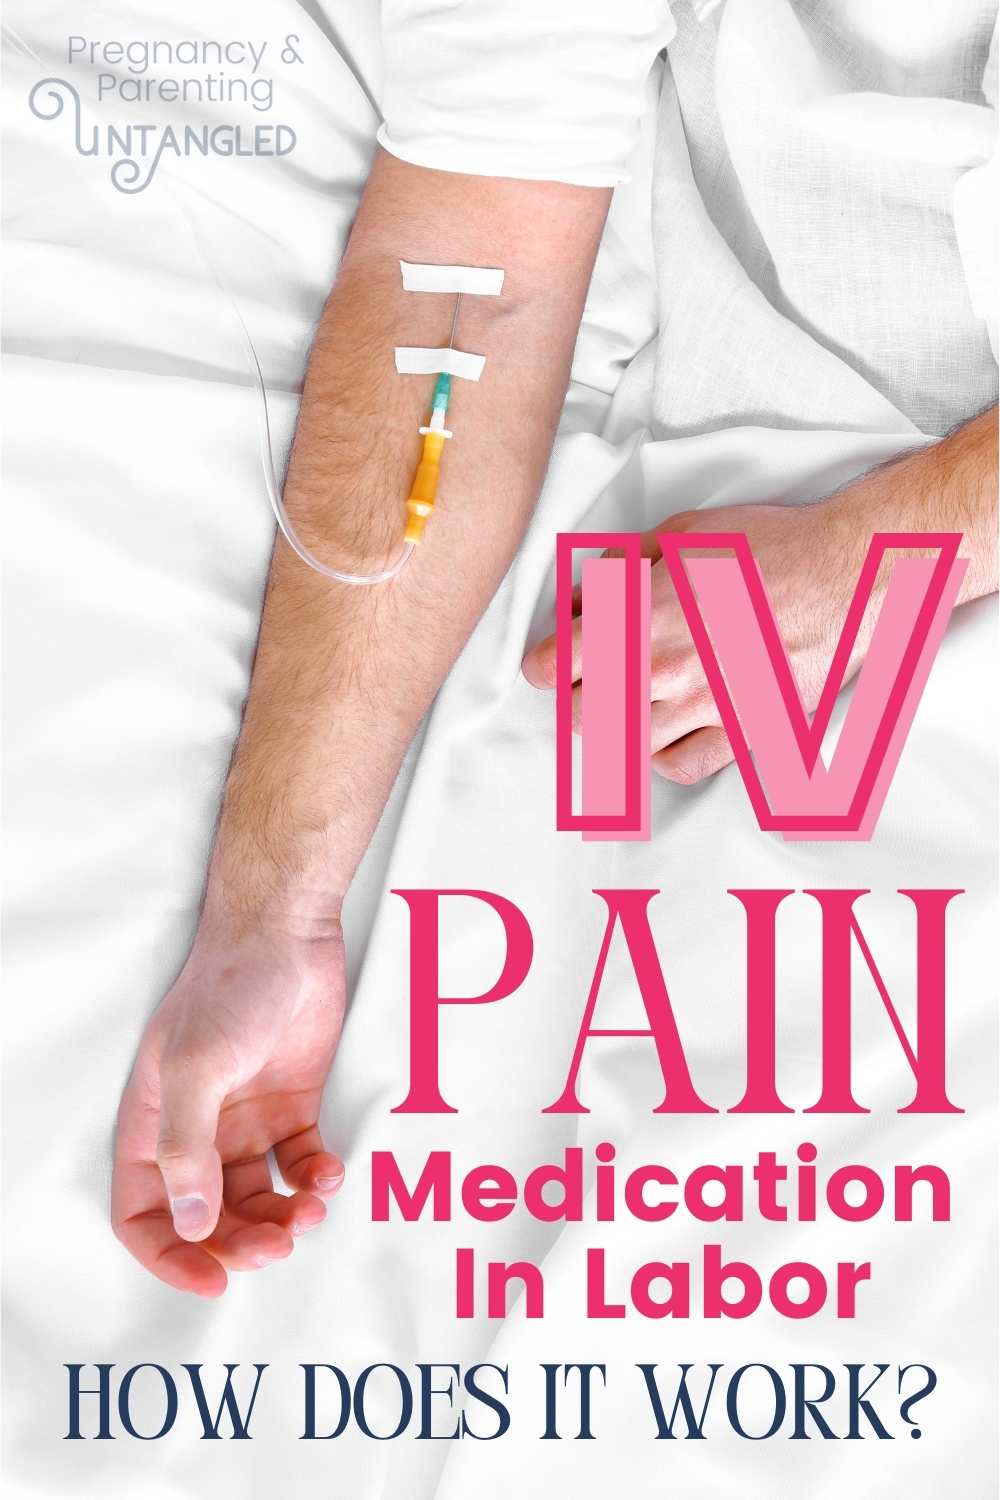 Today I am giving you six facts about using IV pain medication in labor. via @pullingcurls